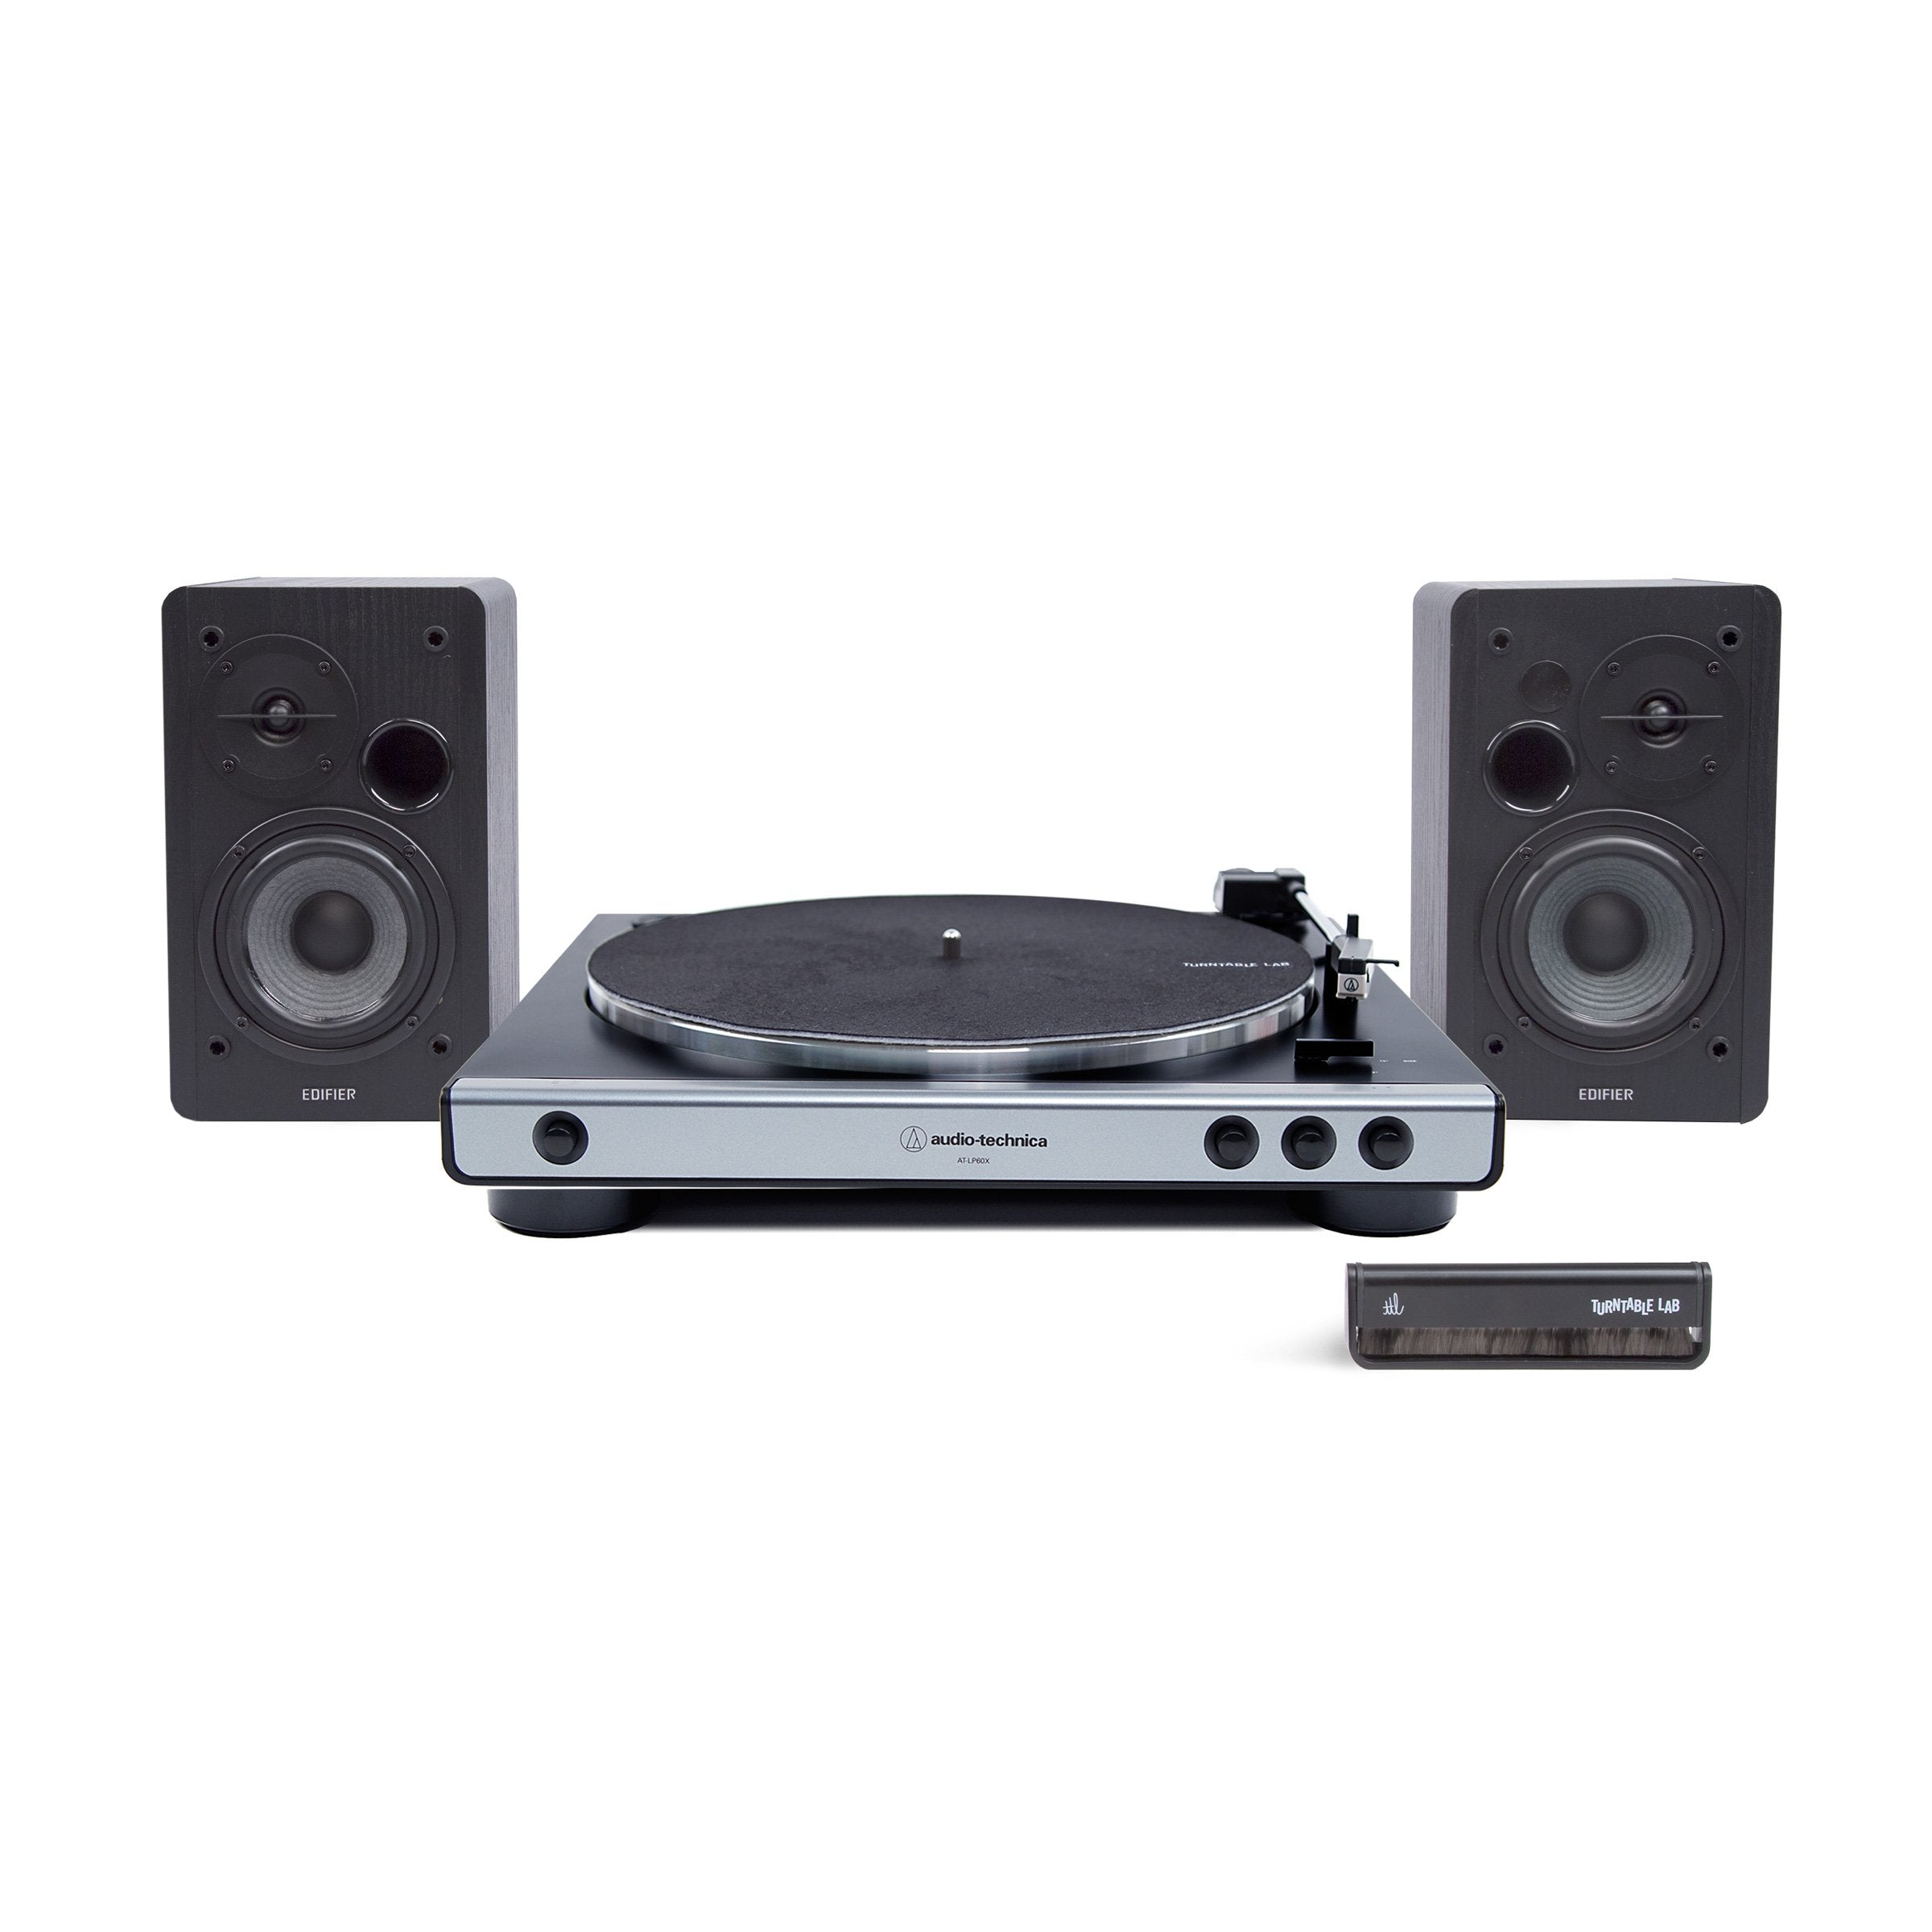 Audio-Technica: AT-LP60XUSB / Edifier R1280DB / Turntable Package